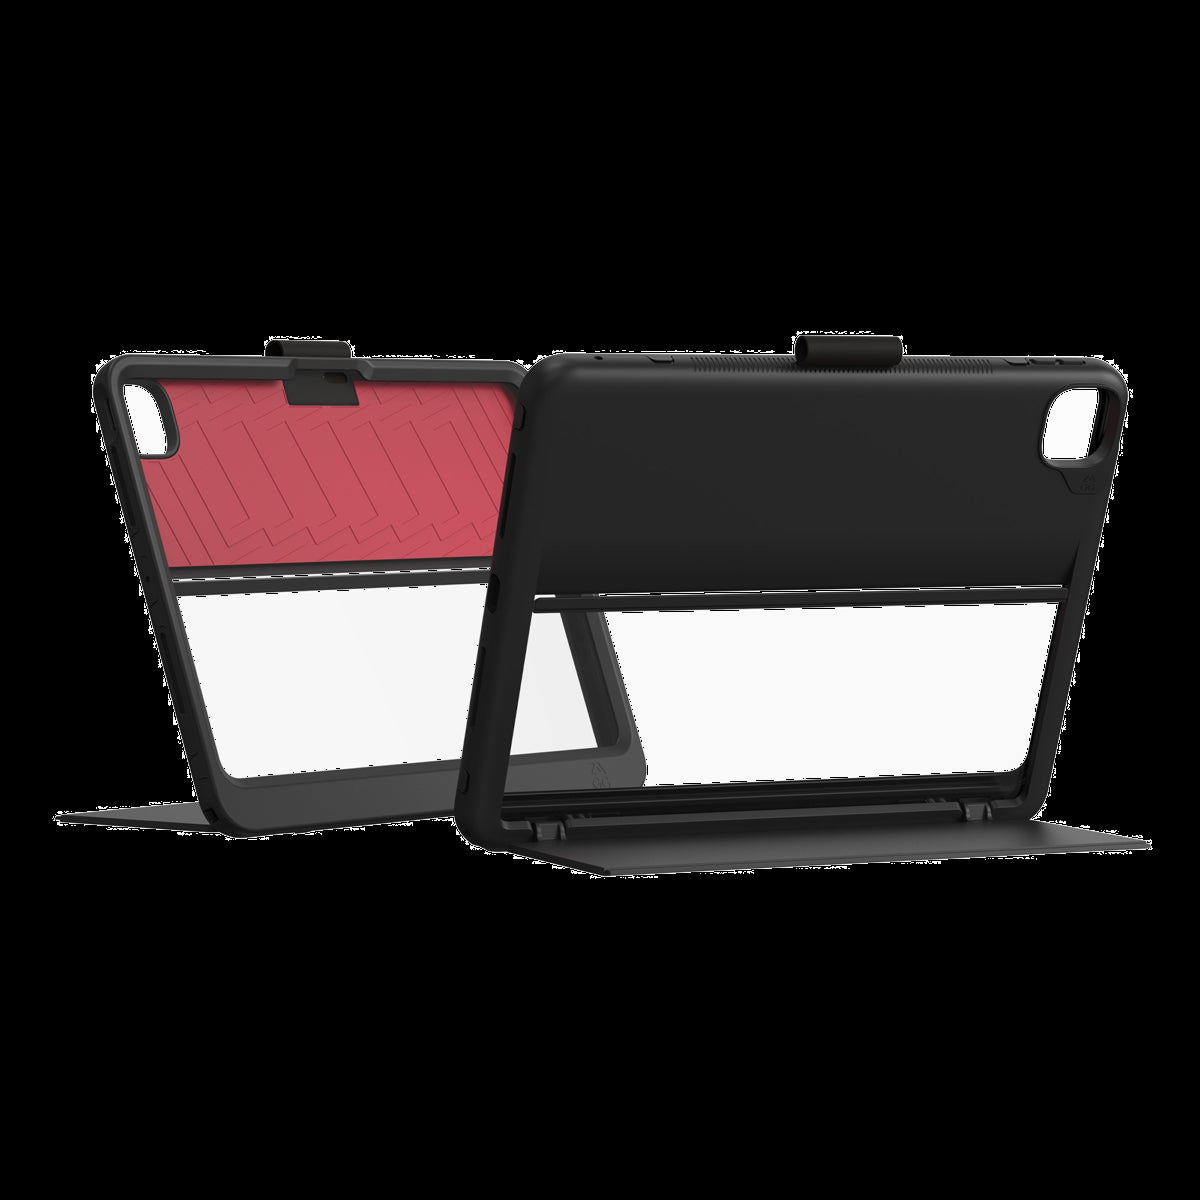 The ZAGG Denali case for tablets combines ultimate protection with useability features and drop protection up to 6.5 feet.